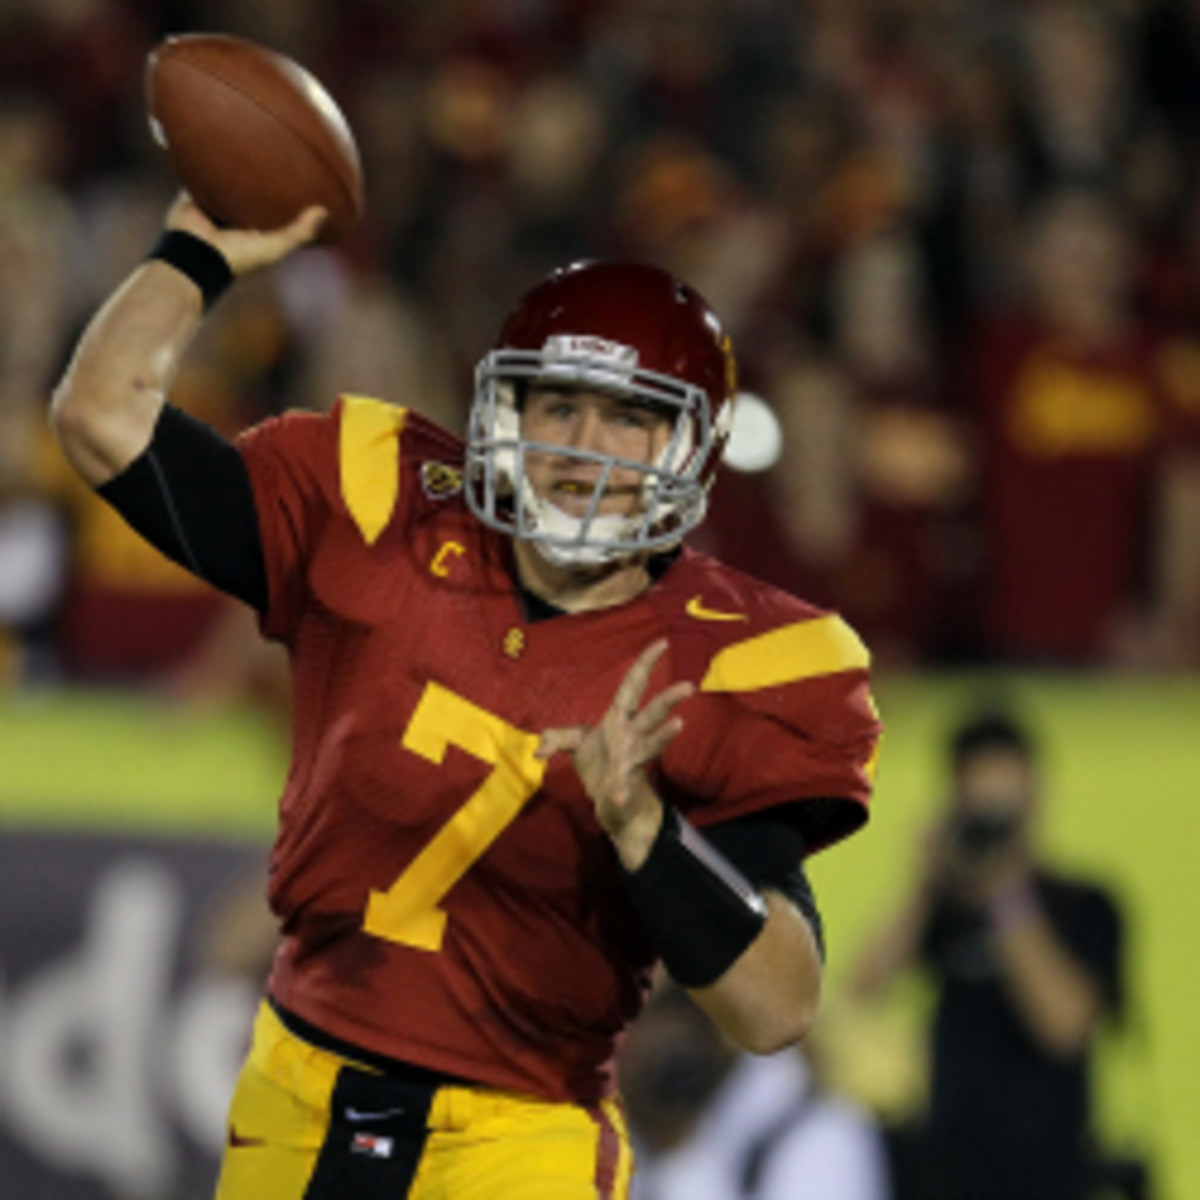 USC quarterback Matt Barkley does not plan to attend the NFL Draft in April. However, he is reportedly working out privately with the Arizona Cardinals. (Stephen Dunn/Getty Images)